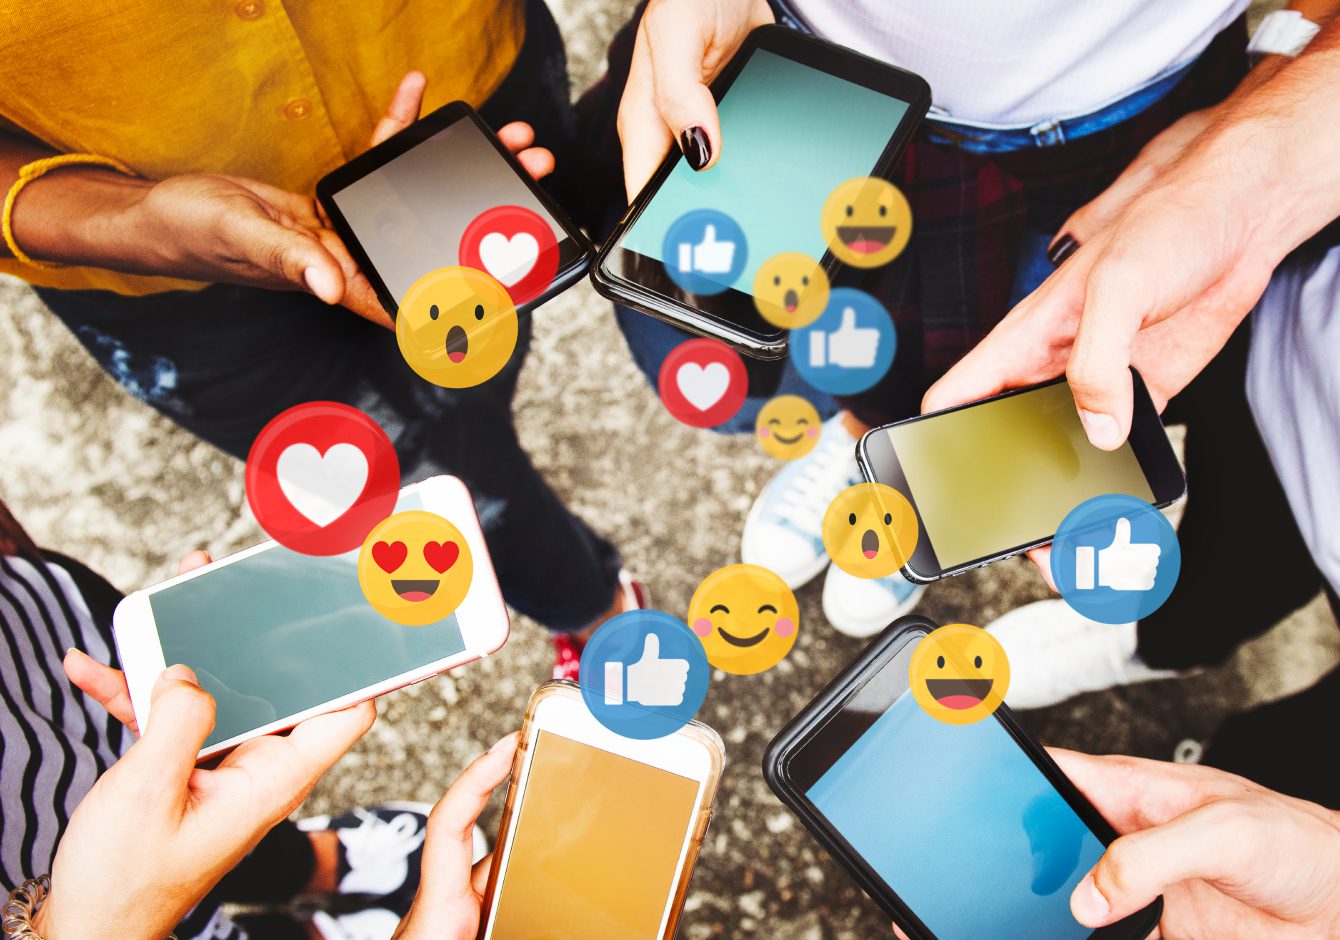 Hands holding smartphones in a circle with social media emoji reactions